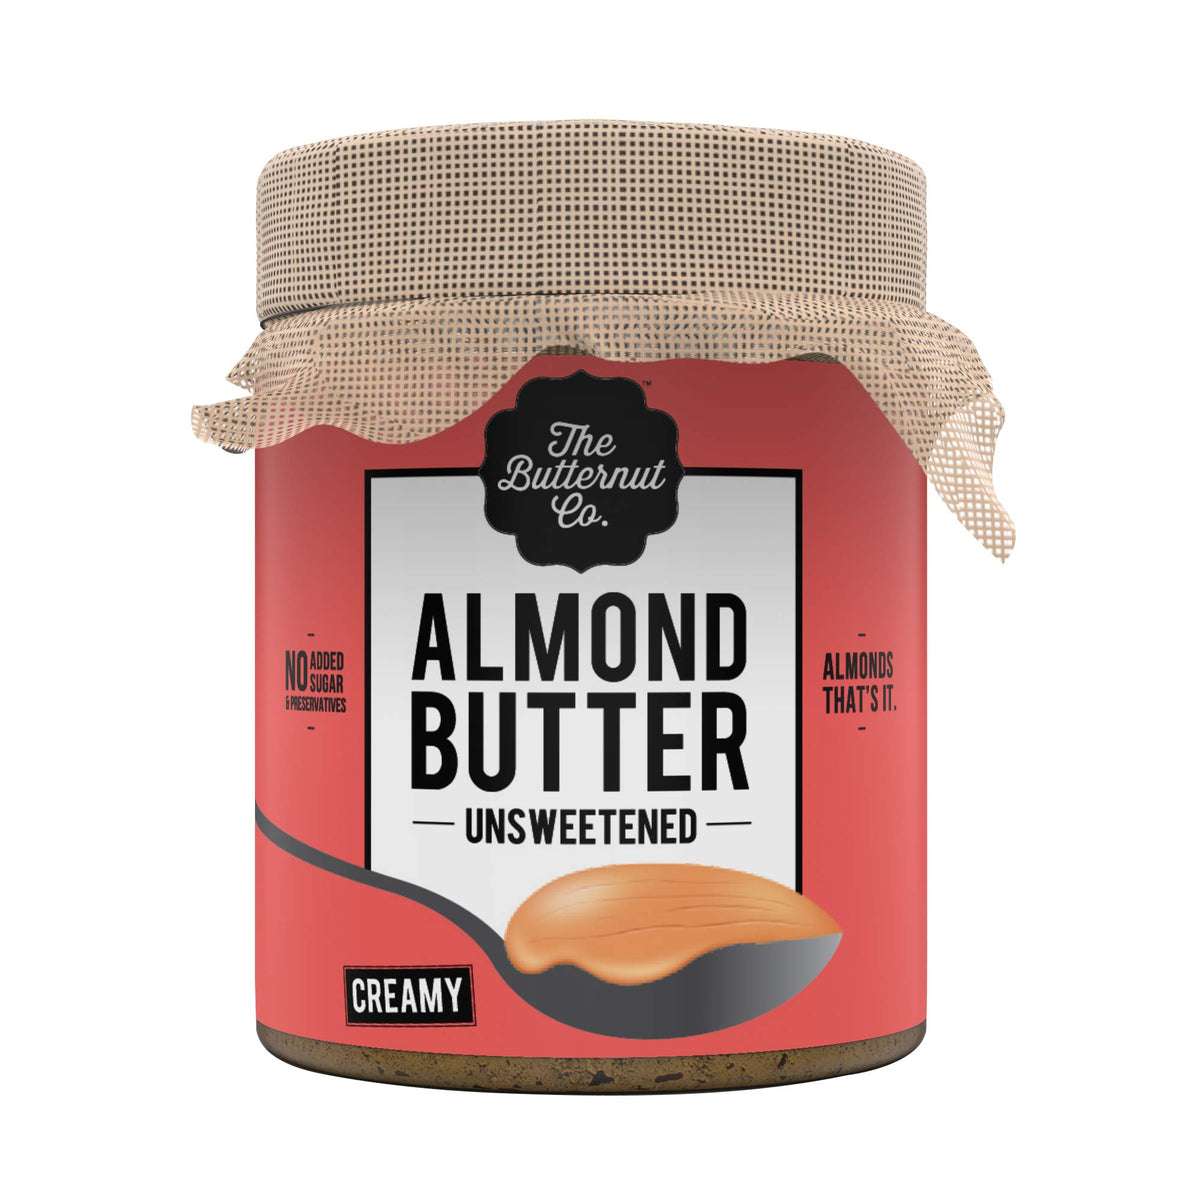 The Butternut Co. Almond Butter Creamy 200g - Unsweetened, 100% Dry Roasted, Heart-Healthy Fats, Protein Source, High in Vitamin E - Gluten-Free, Vegan, Keto-Friendly